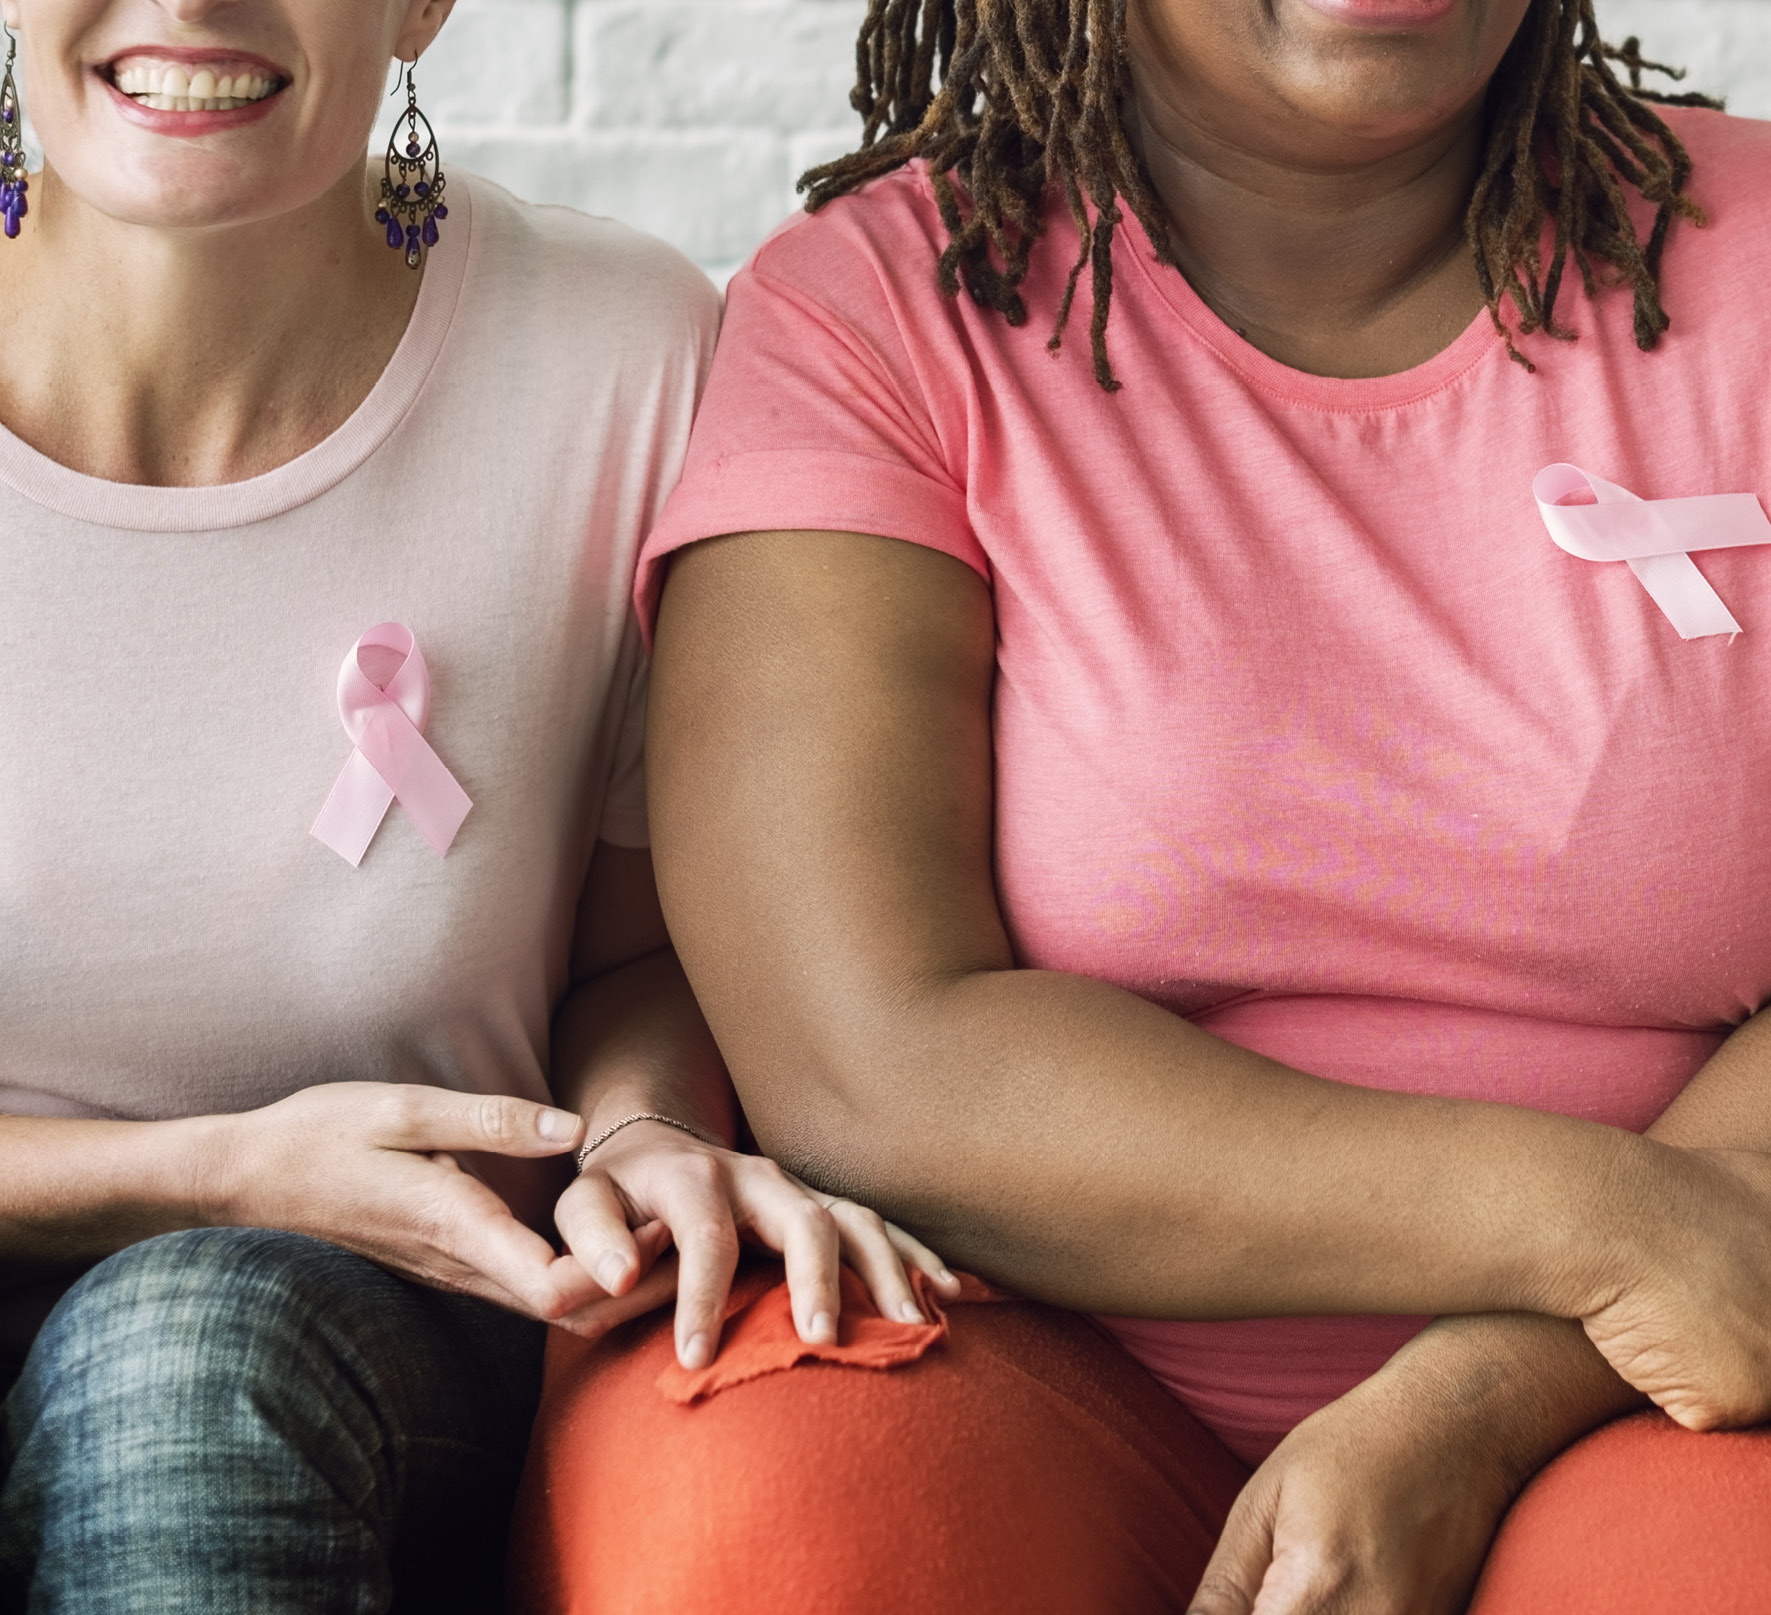 Self-examination: How often Should You Examine Yourself for Breast Cancer?